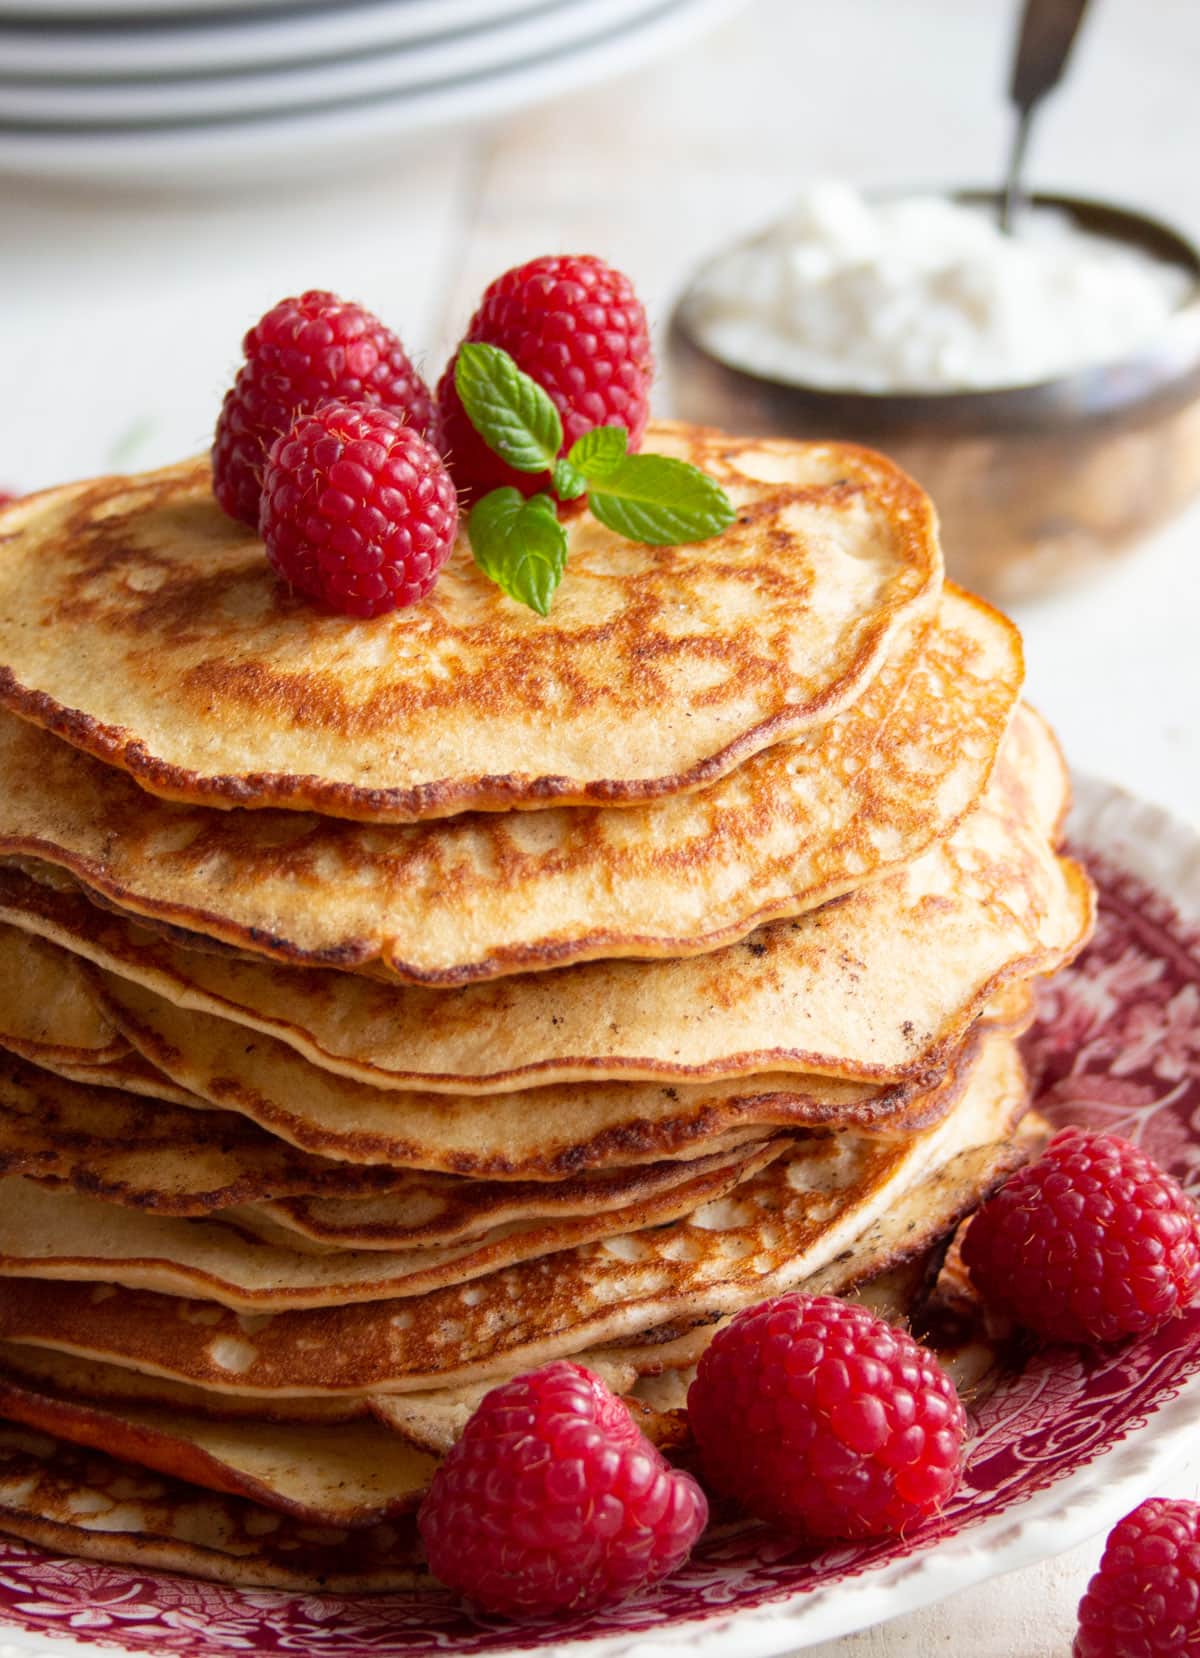 A stack of pancakes topped with raspberries and a bowl with yoghurt.